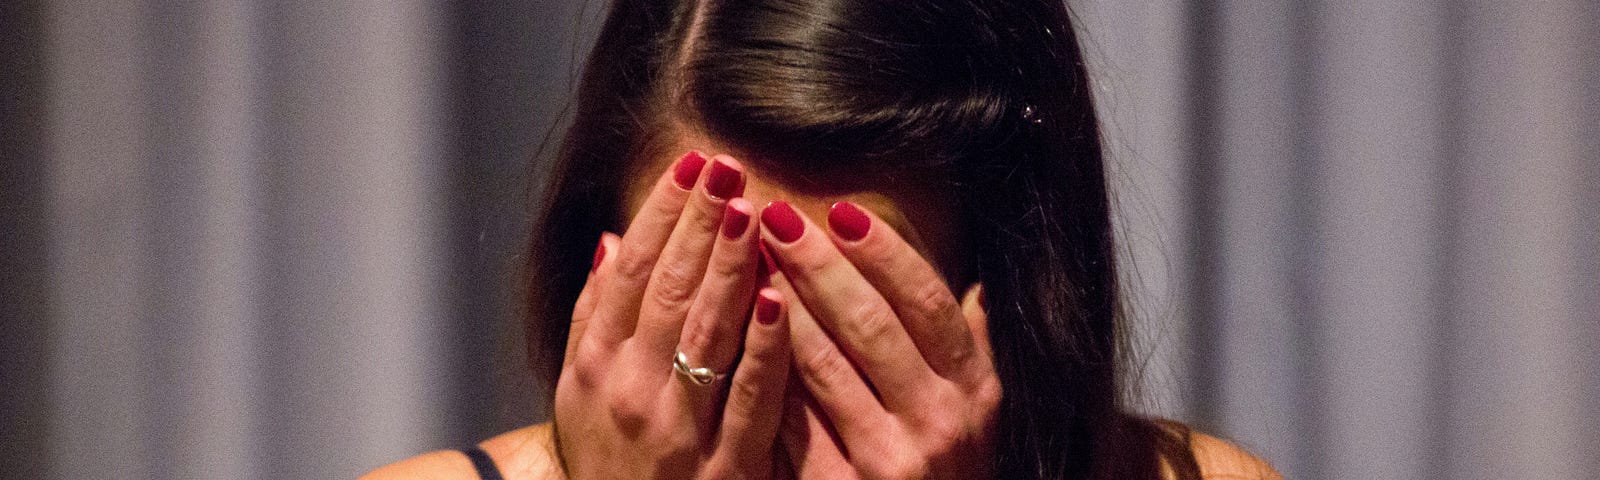 Dark haired woman covering her face with her hands in embarrassment